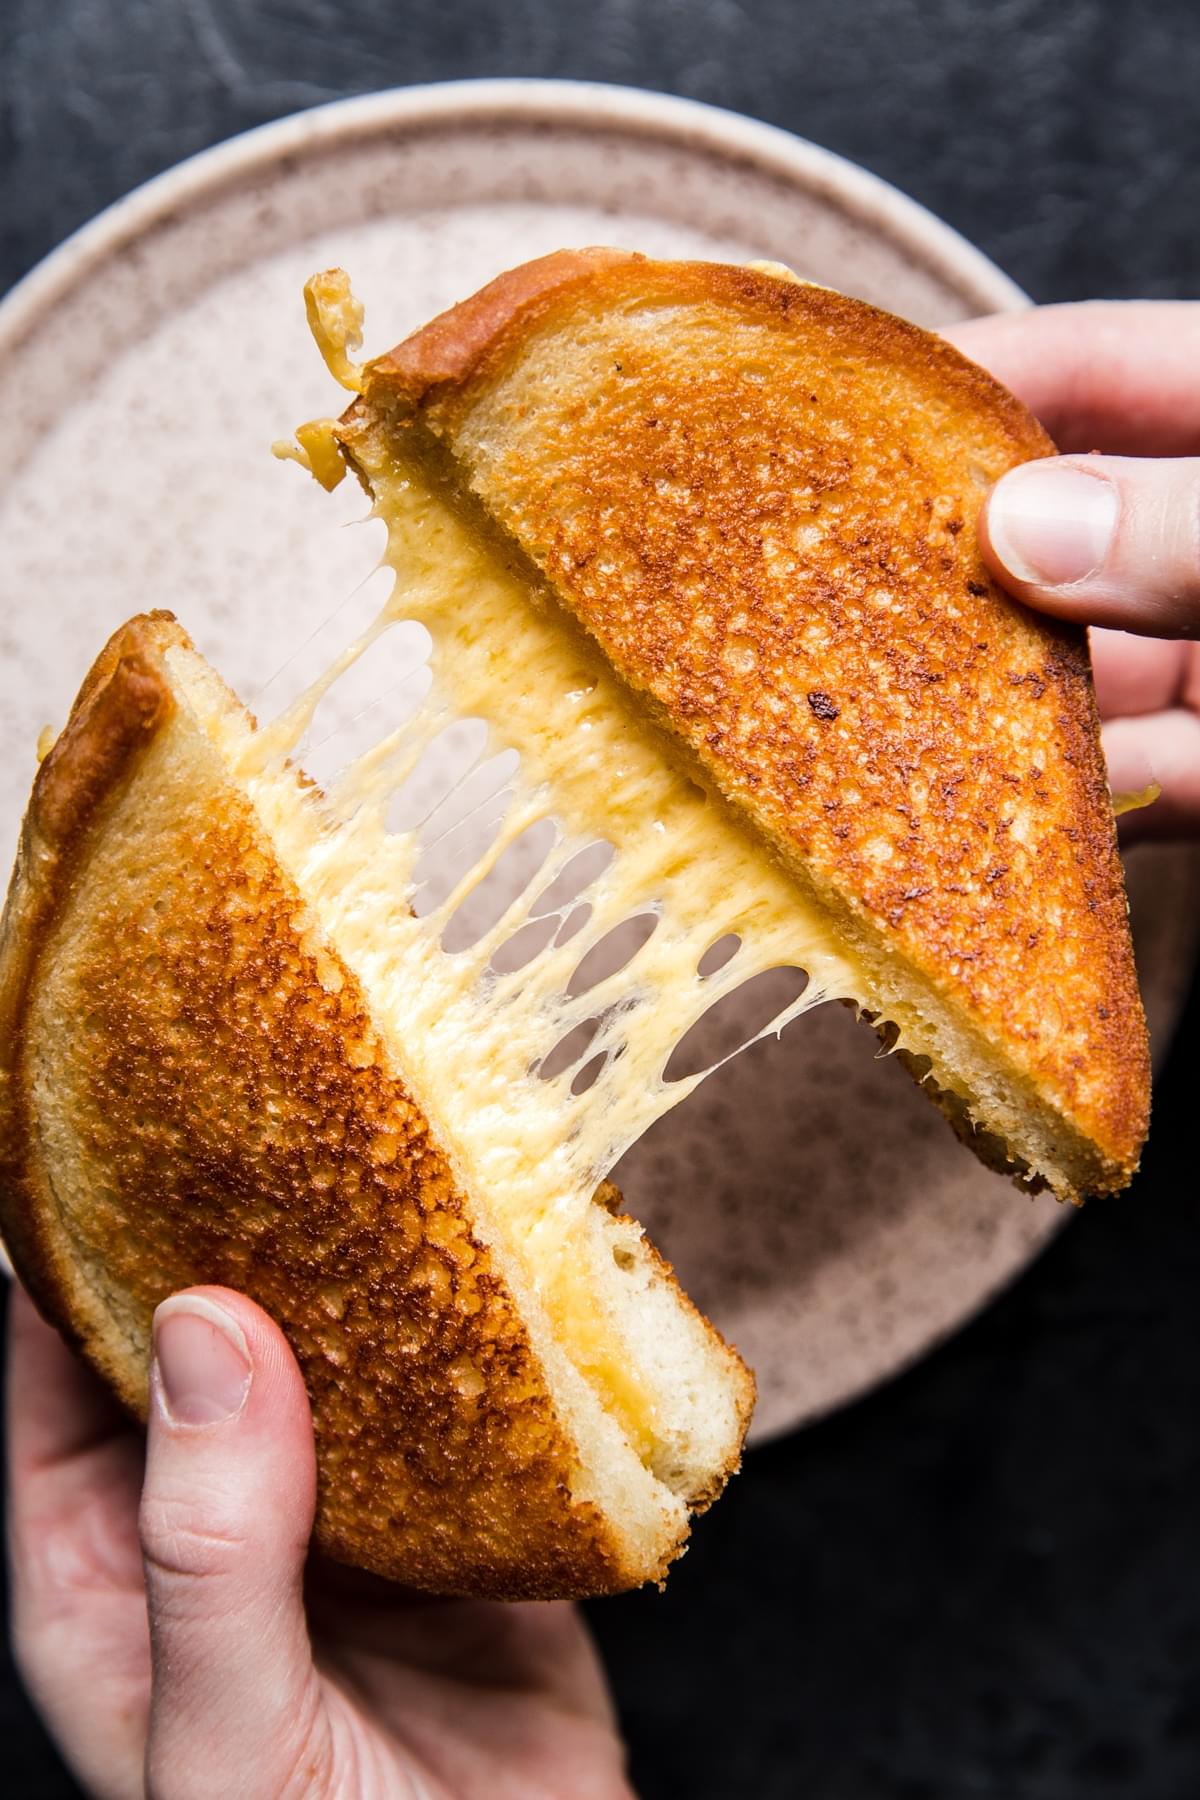 hands pulling apart two halves of grilled cheese showing melted cheese